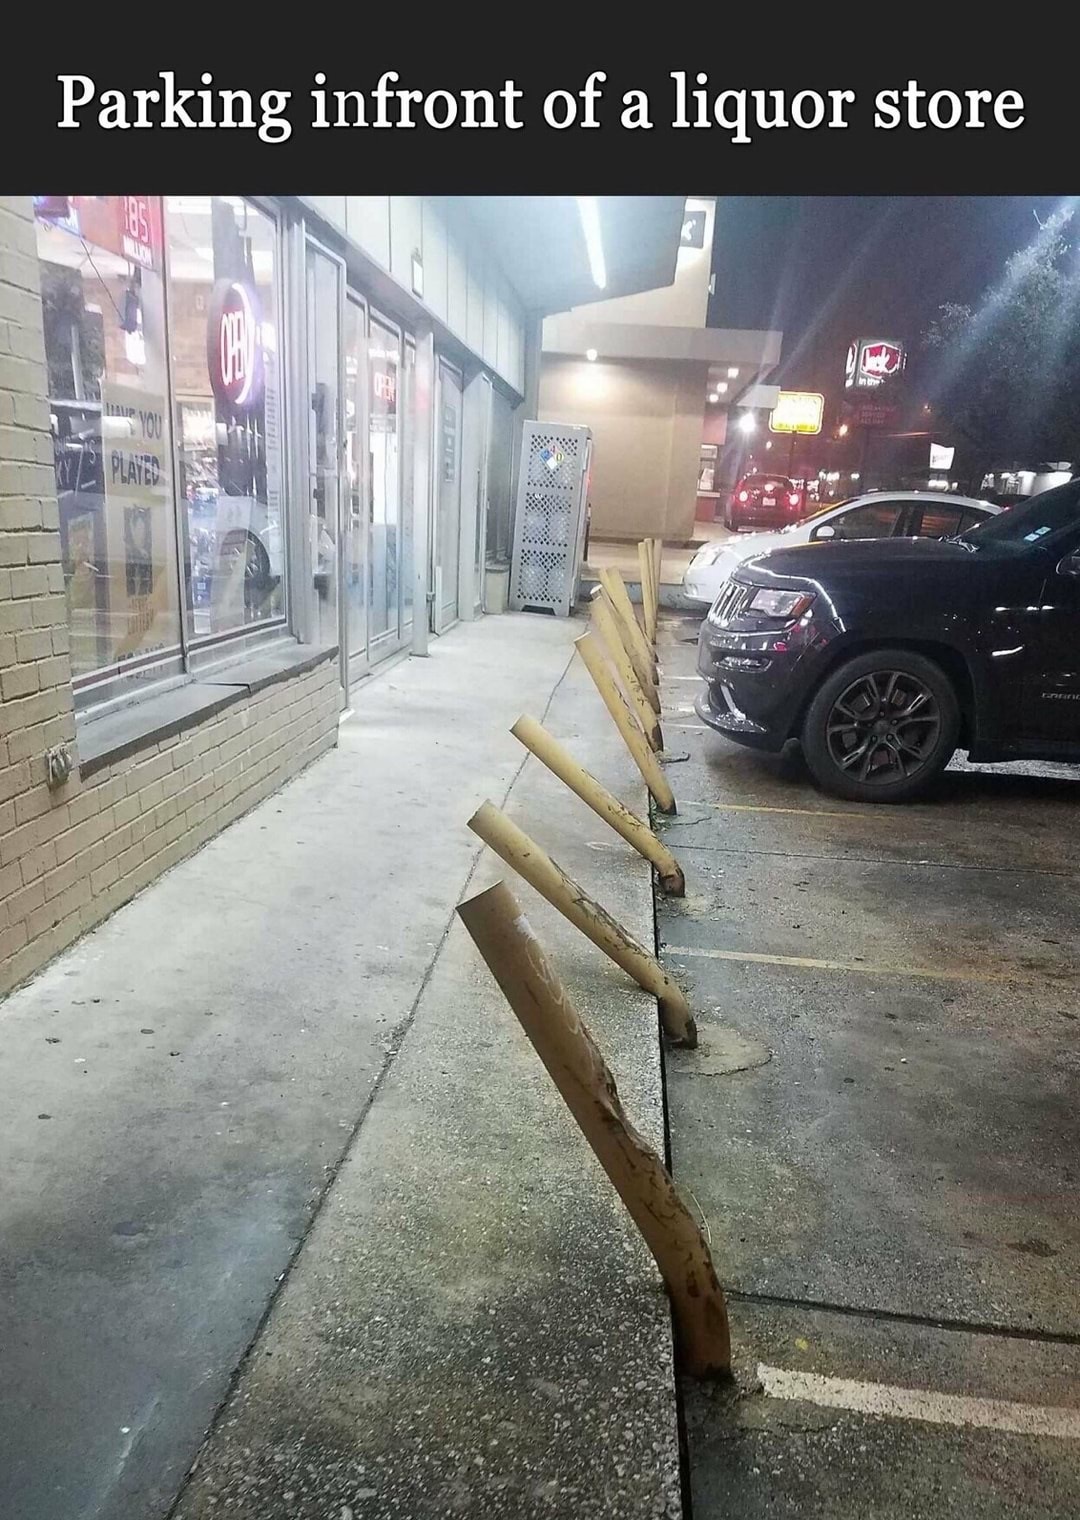 parking in front of liquor store - Parking infront of a liquor store